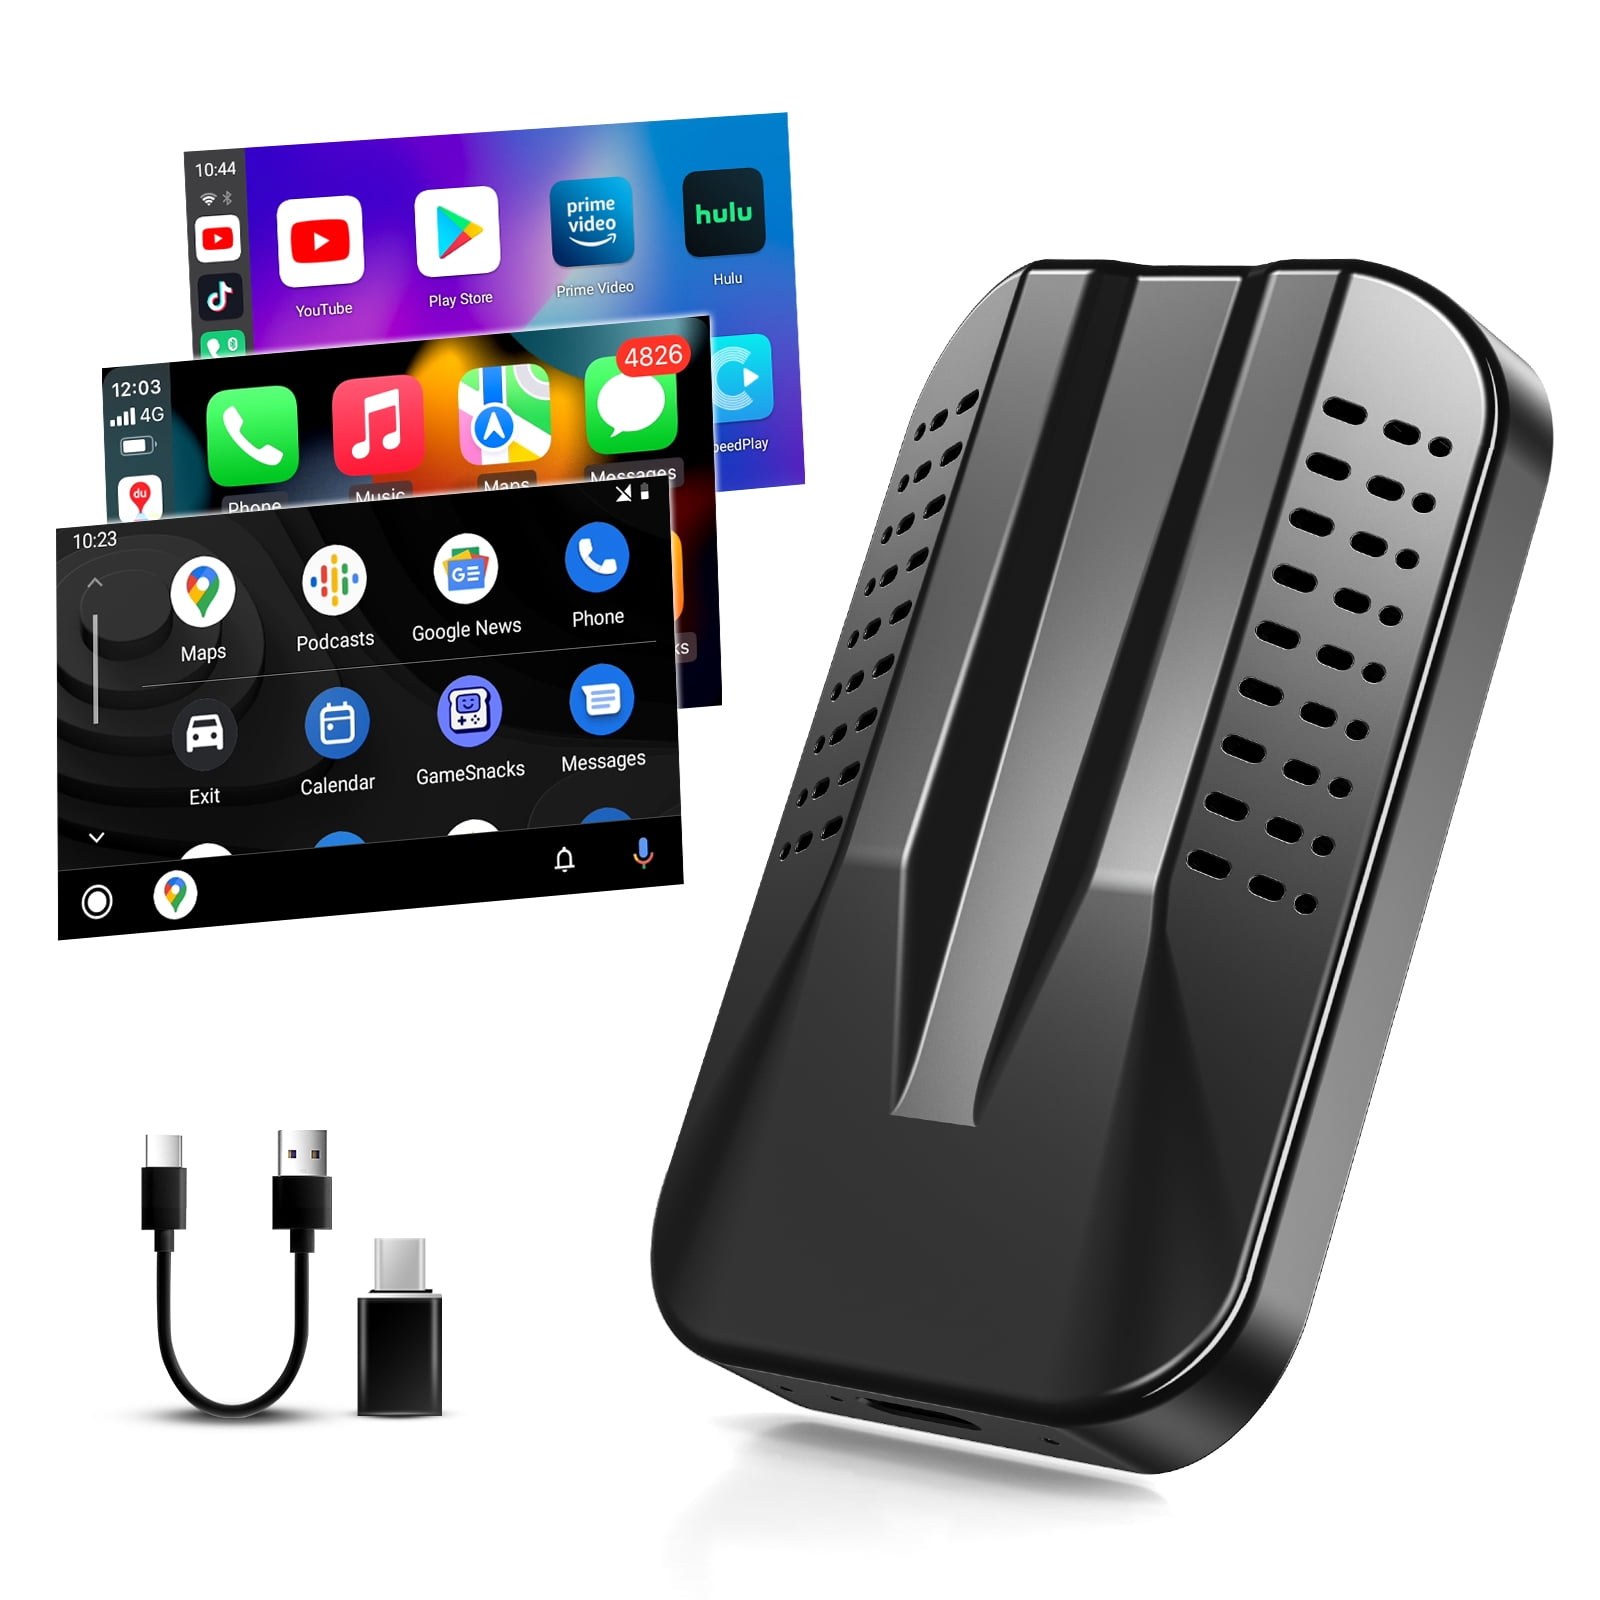 CarlinKit 5.0 CarPlay Wireless Adapter & Android Auto Wireless,Achieve  Wireless Life,Upgrade Online,Stable Connectivity, Universal Compatibility.